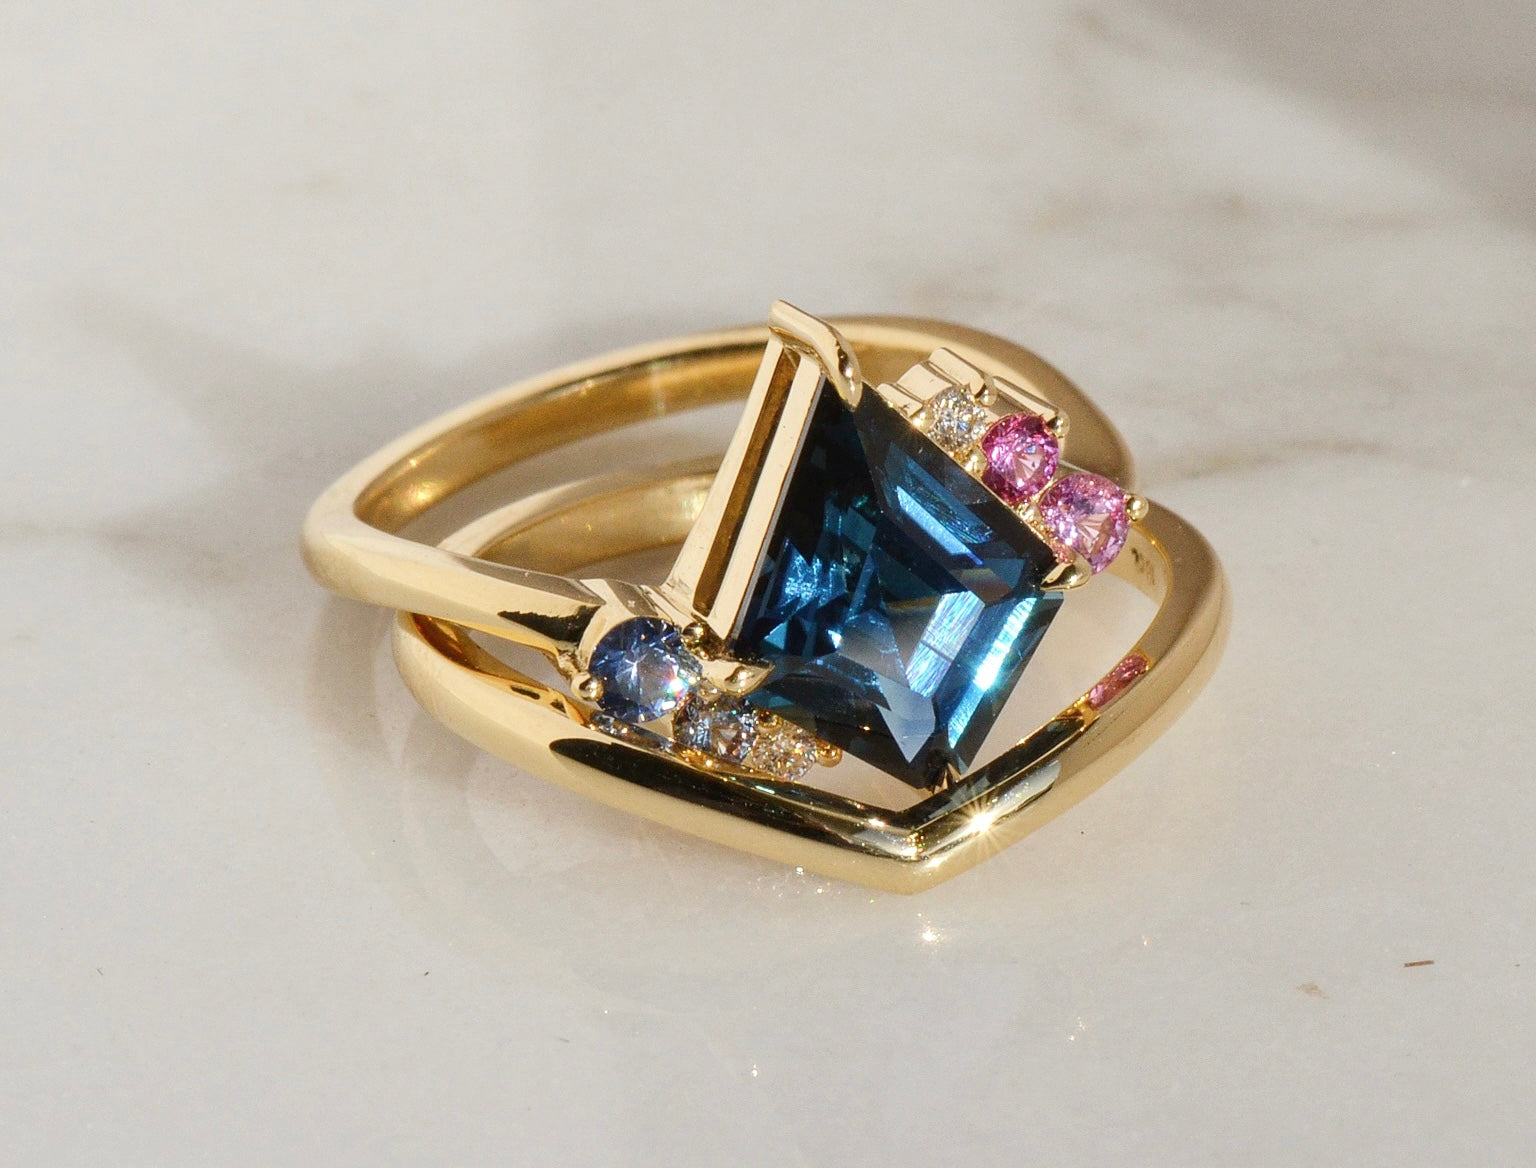 Layla Kaisi Collection bespoke sapphire engagement ring and gold wedding band